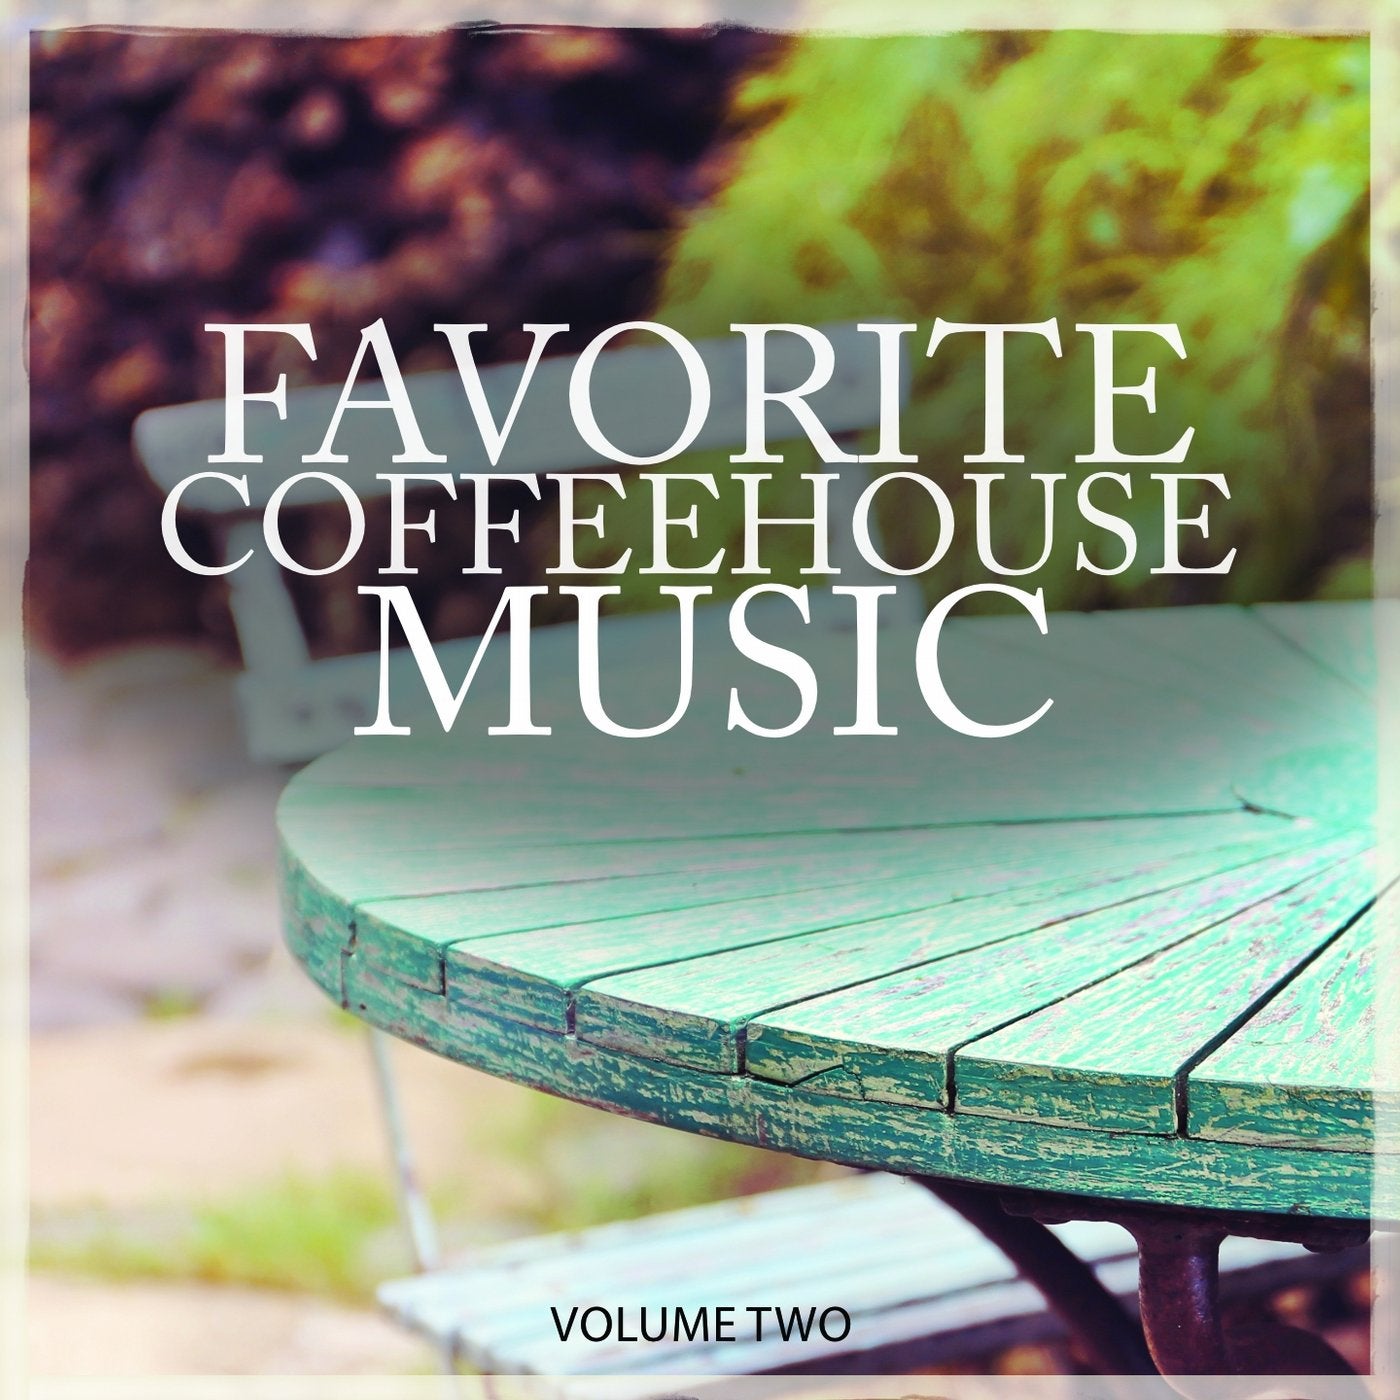 Favorite Coffeehouse Music, Vol. 2 (Gentle Picked Smooth Electronic Jazz Masterpieces)